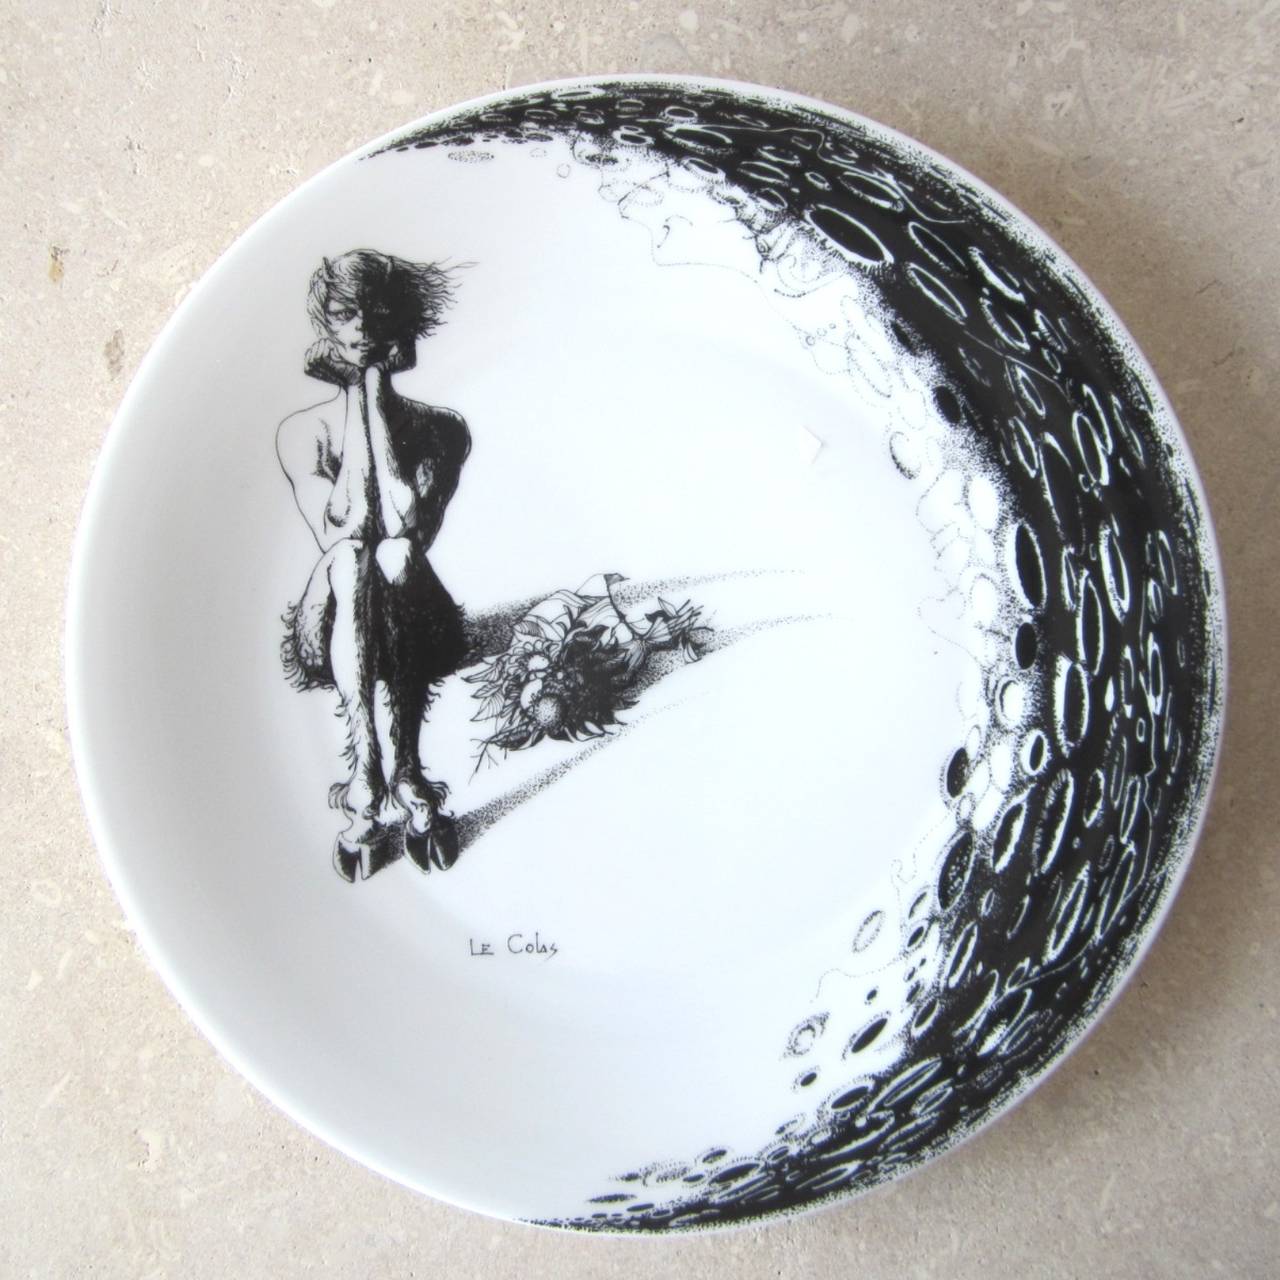 Mid-Century porcelain plate by The artist Le Colas.
He made a limited edition of porcelain painted.
This one is the 